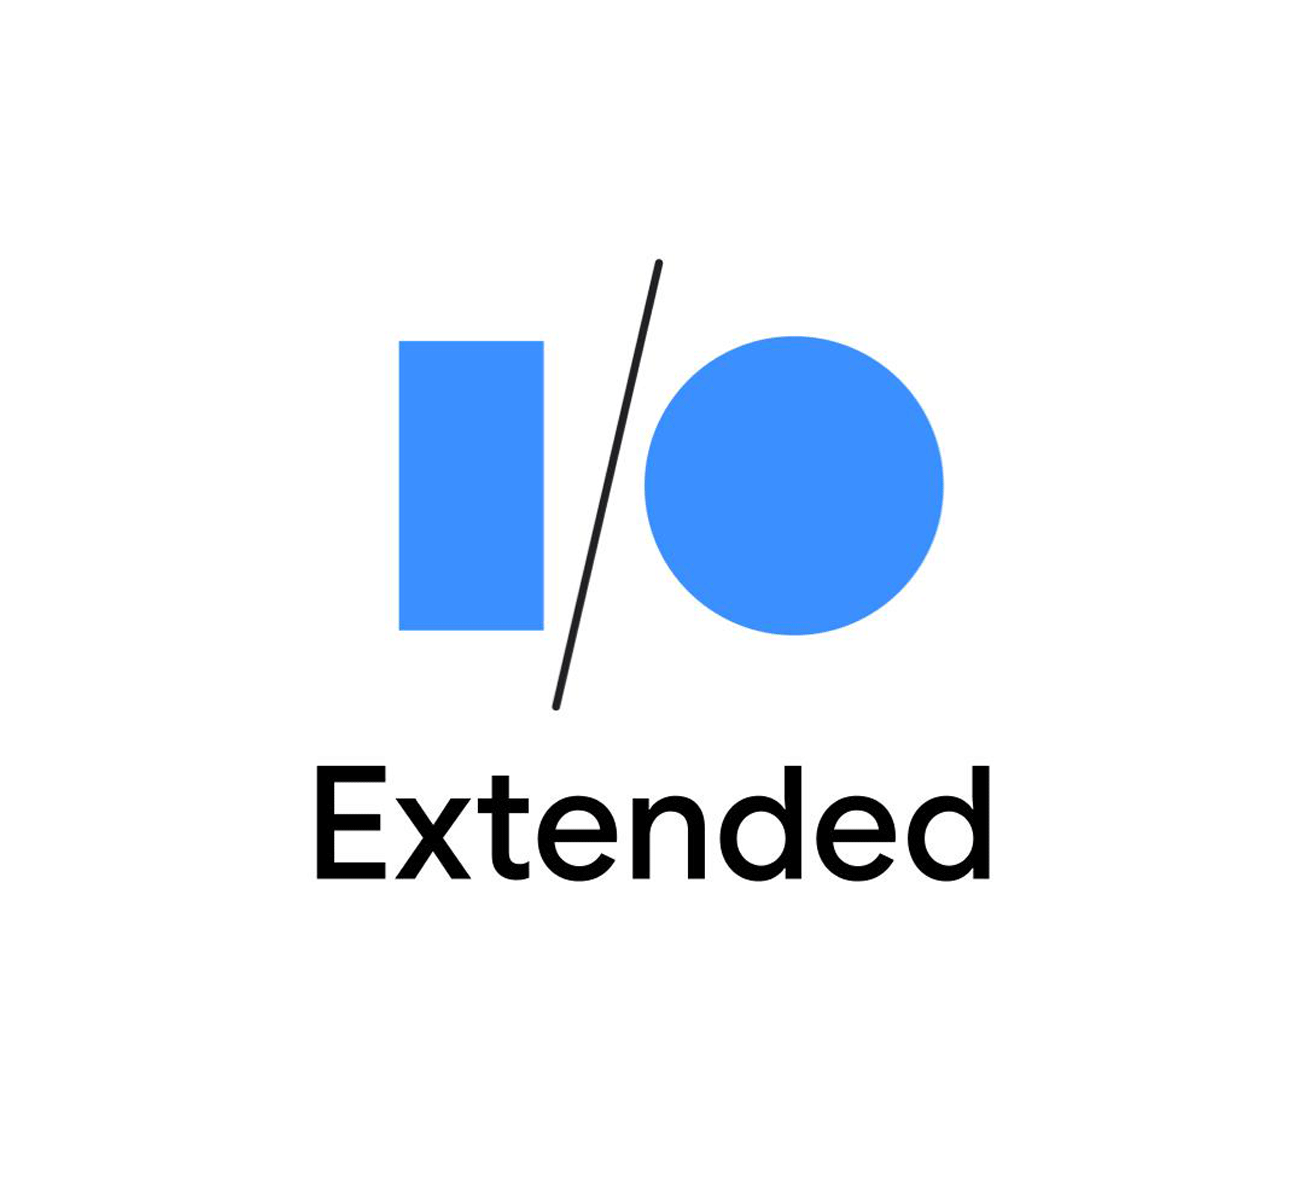 [GDG] Google I/O Extended for Play partners 2021 | Japan